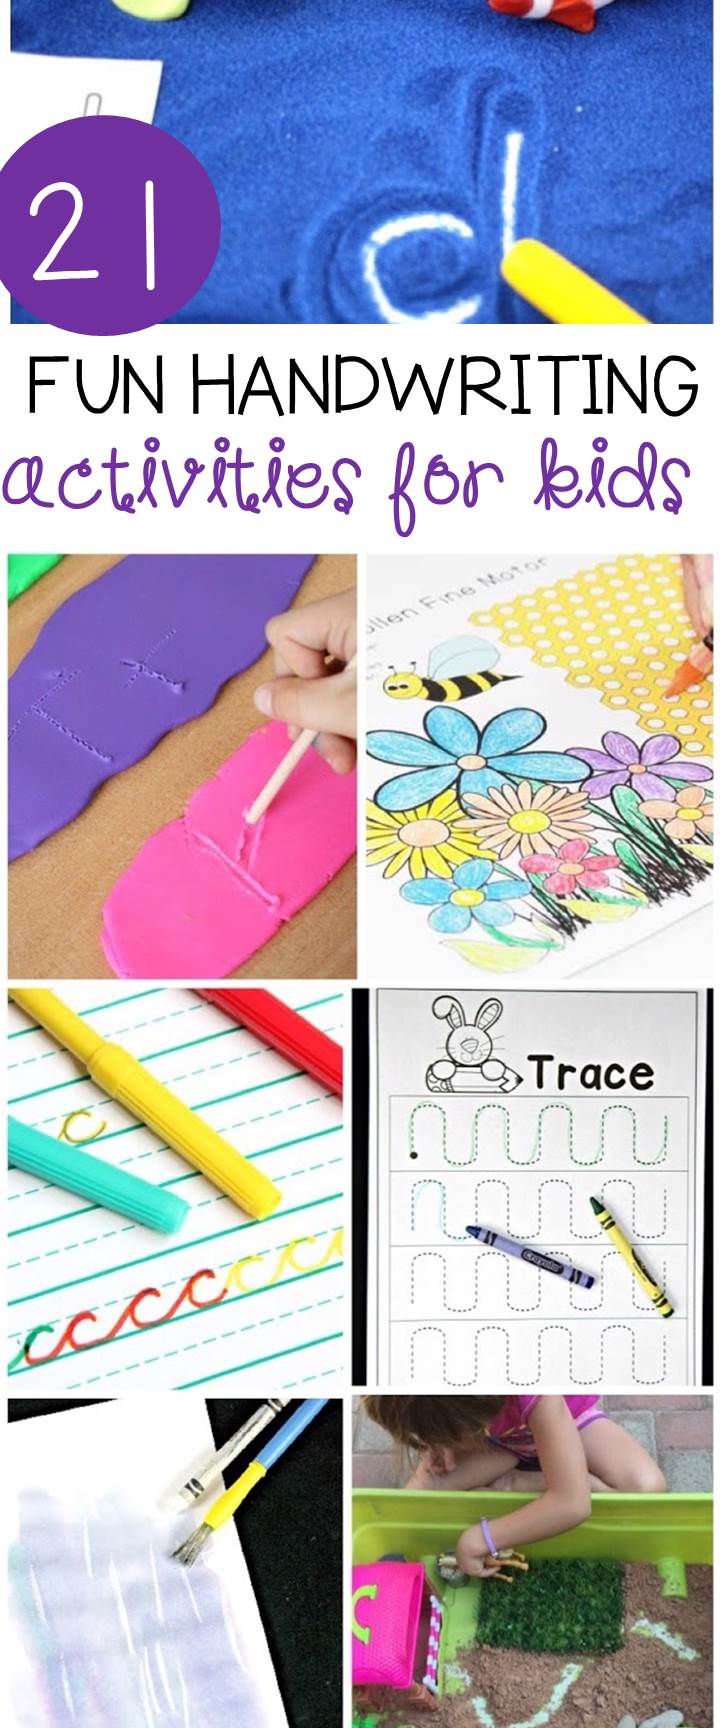 21 Fun Handwriting Activities for Kids - The Letters of ...